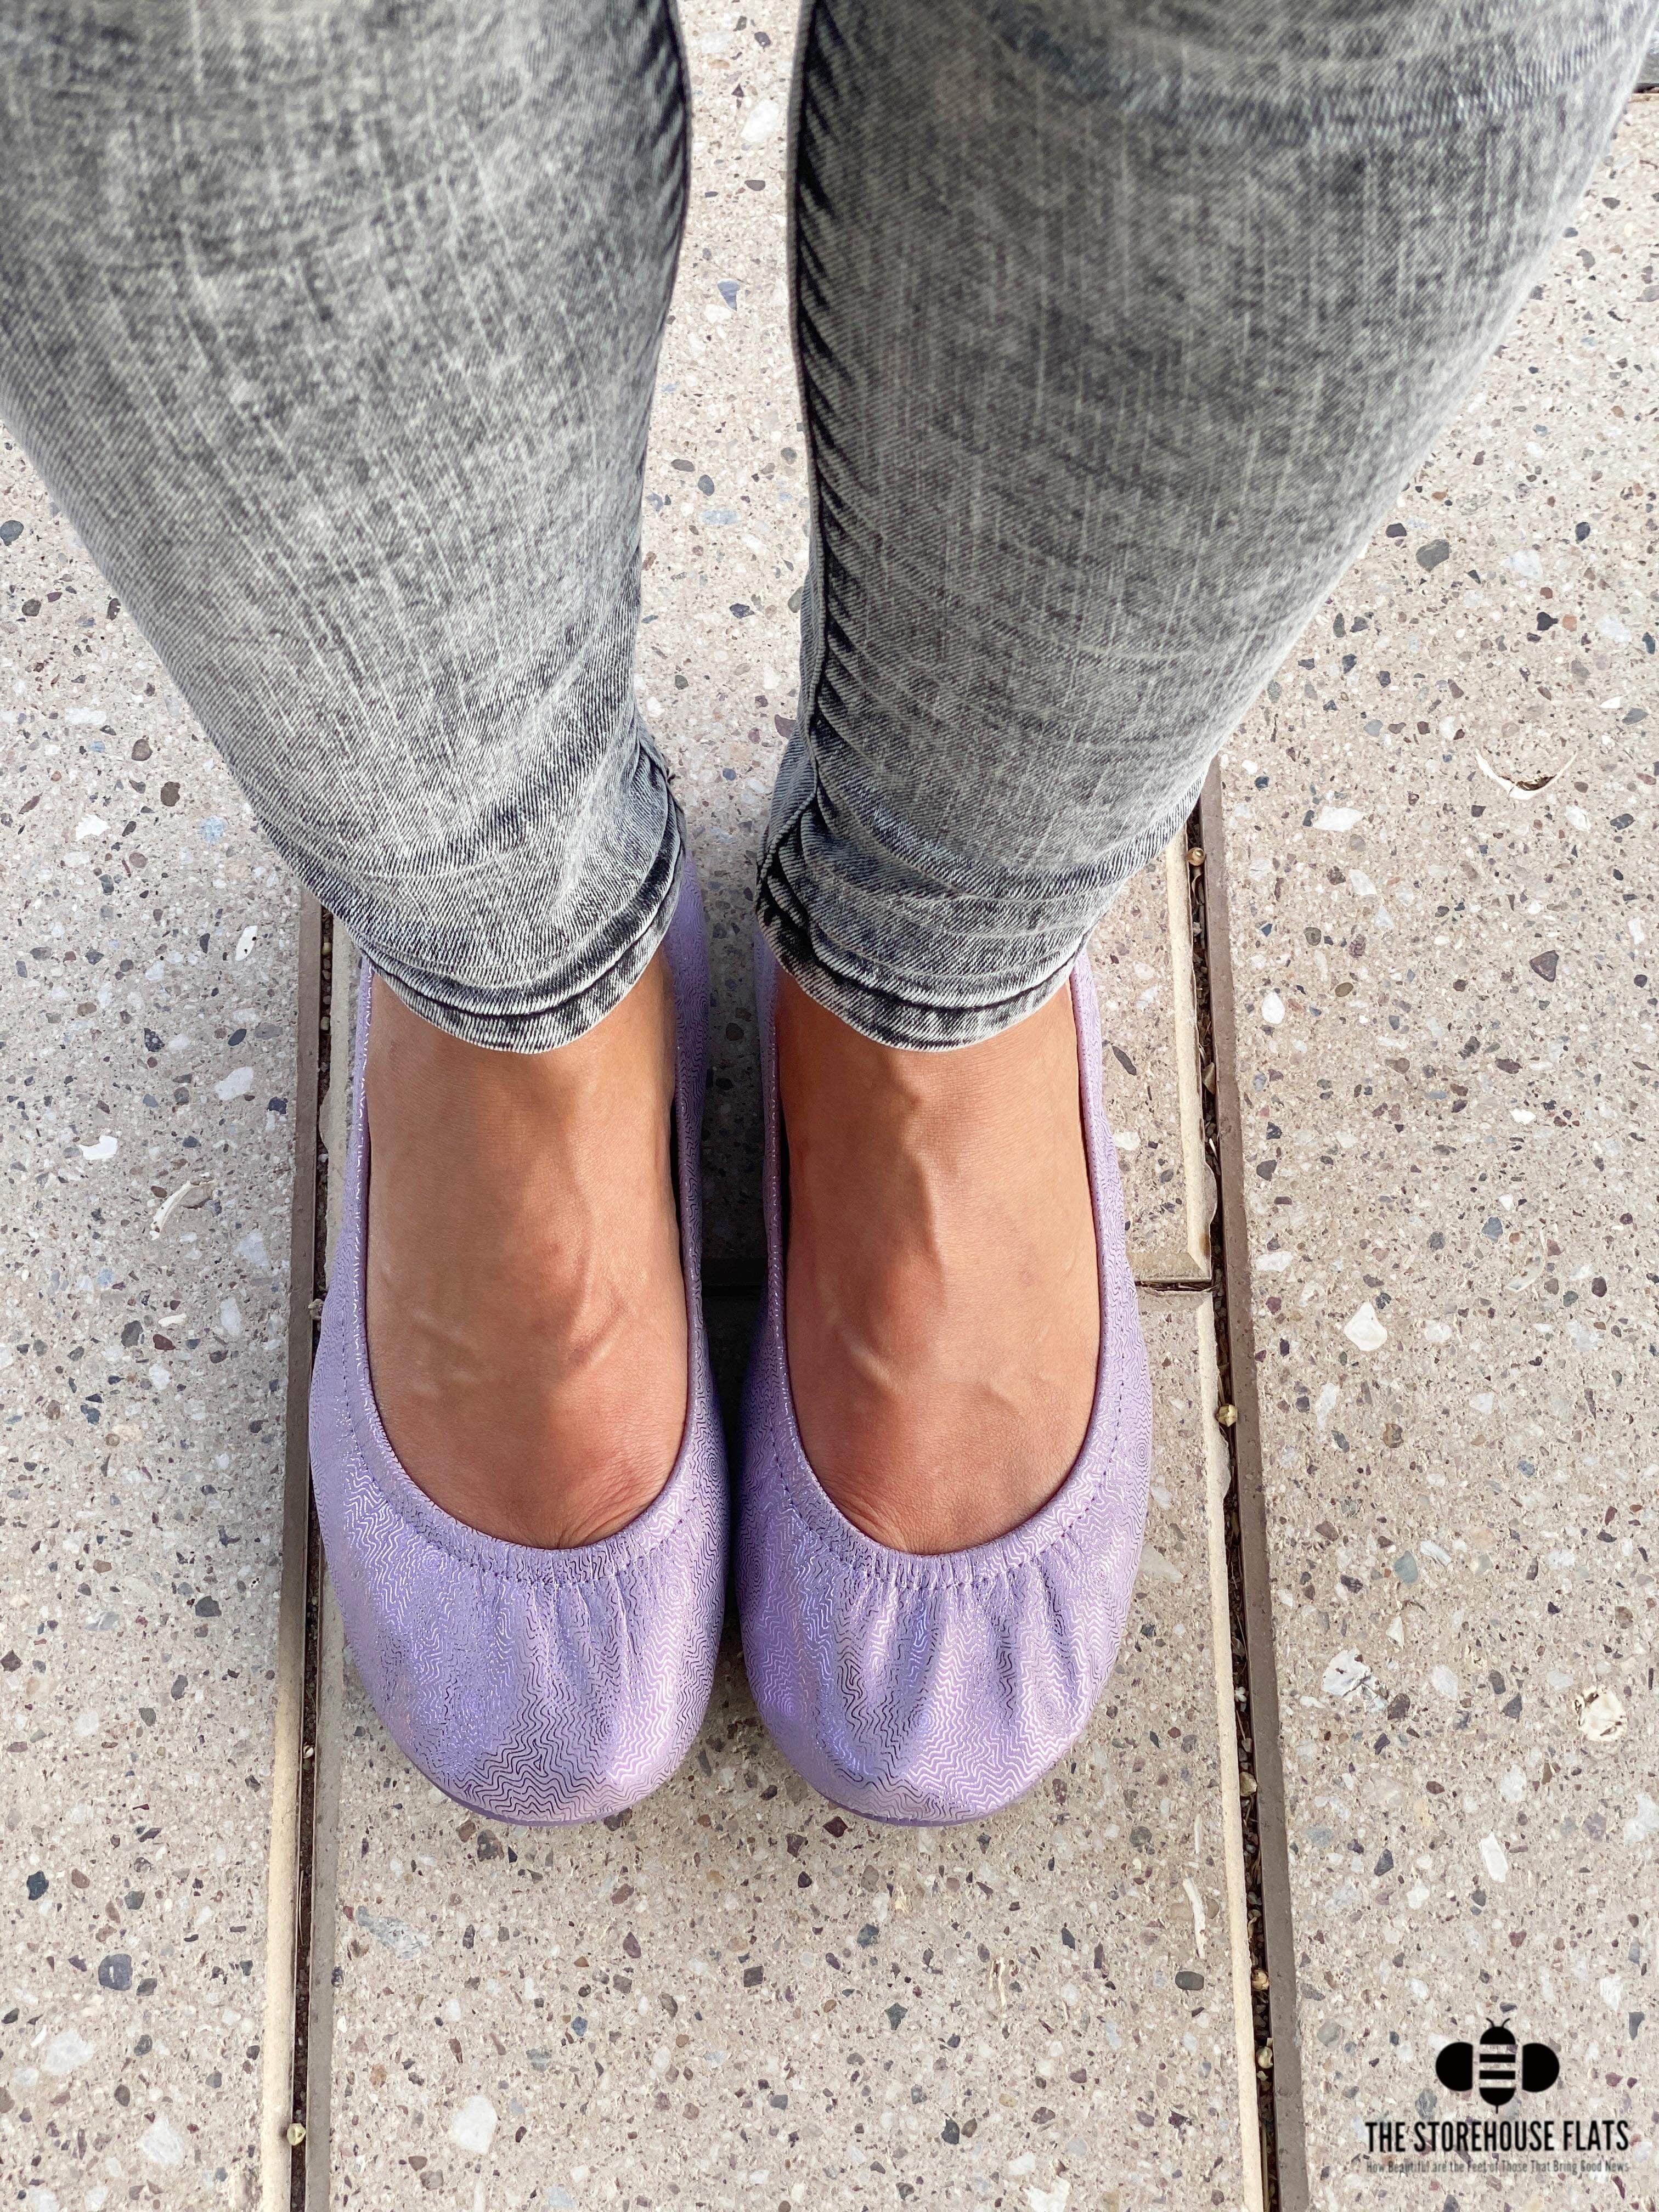 LAVENDER DAZE | MAY PREORDER - The Storehouse Flats